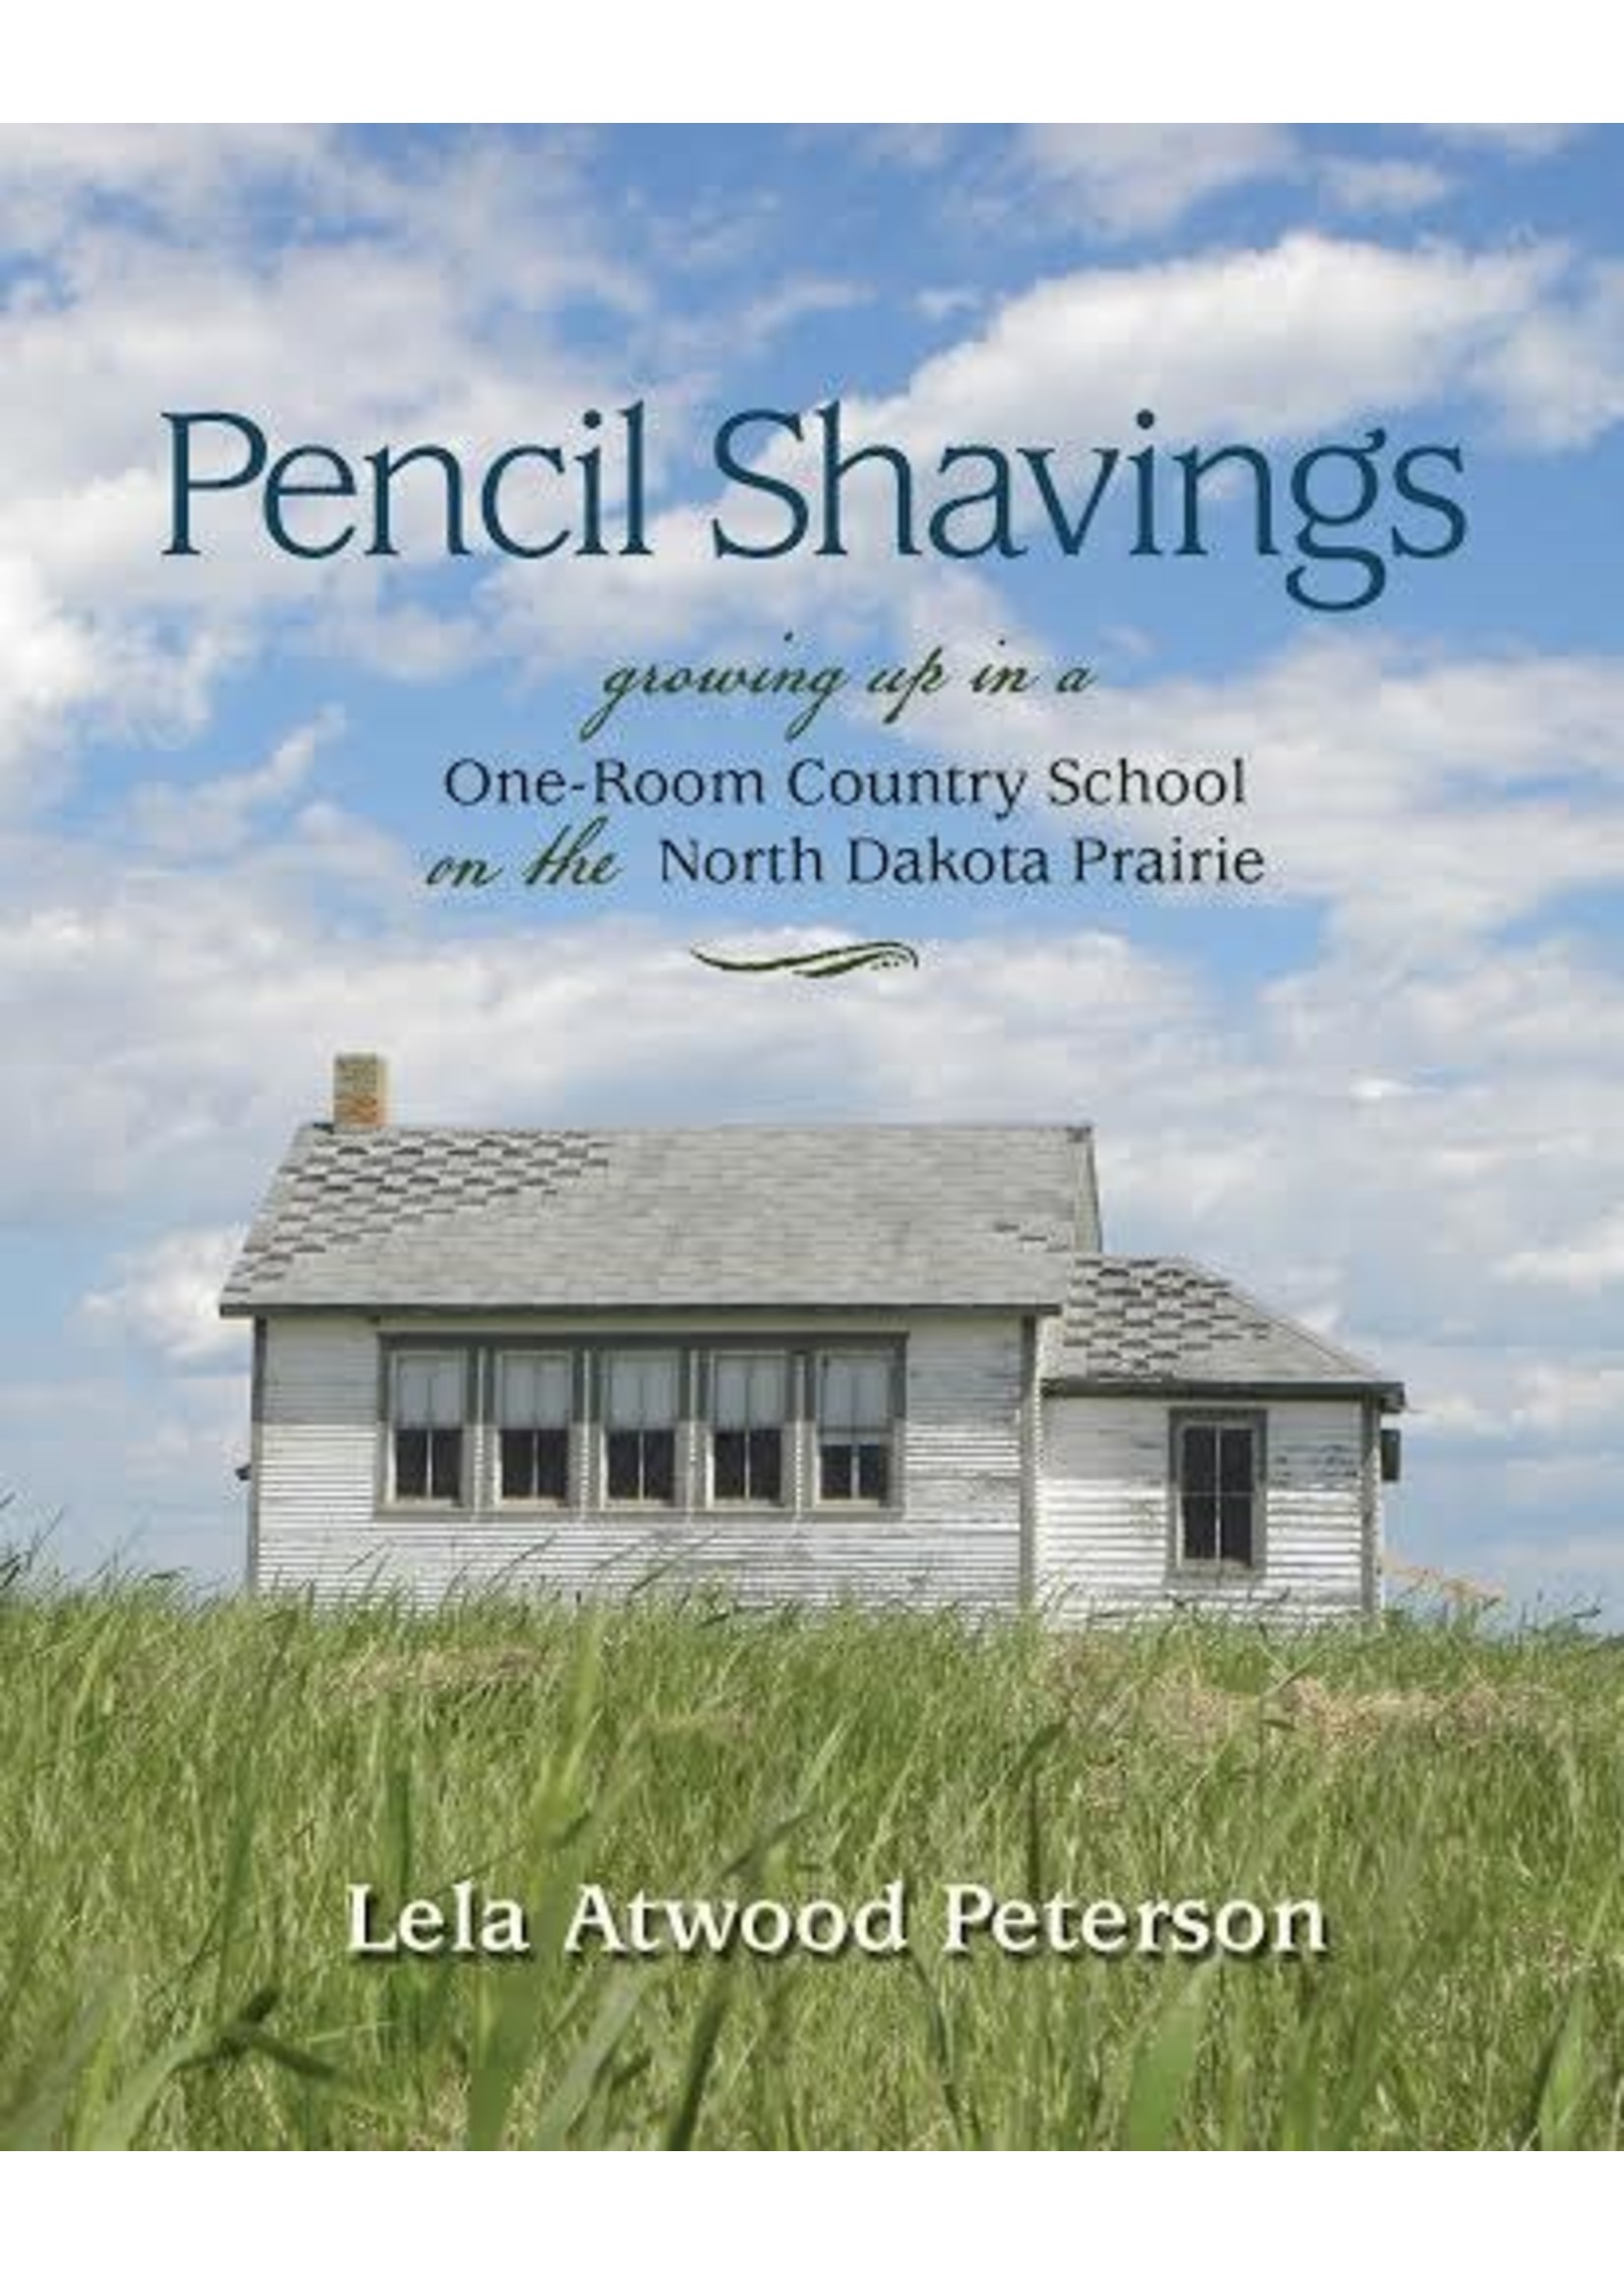 Pencil Shavings: Growing Up in a One-Room country School on the ND Prairie